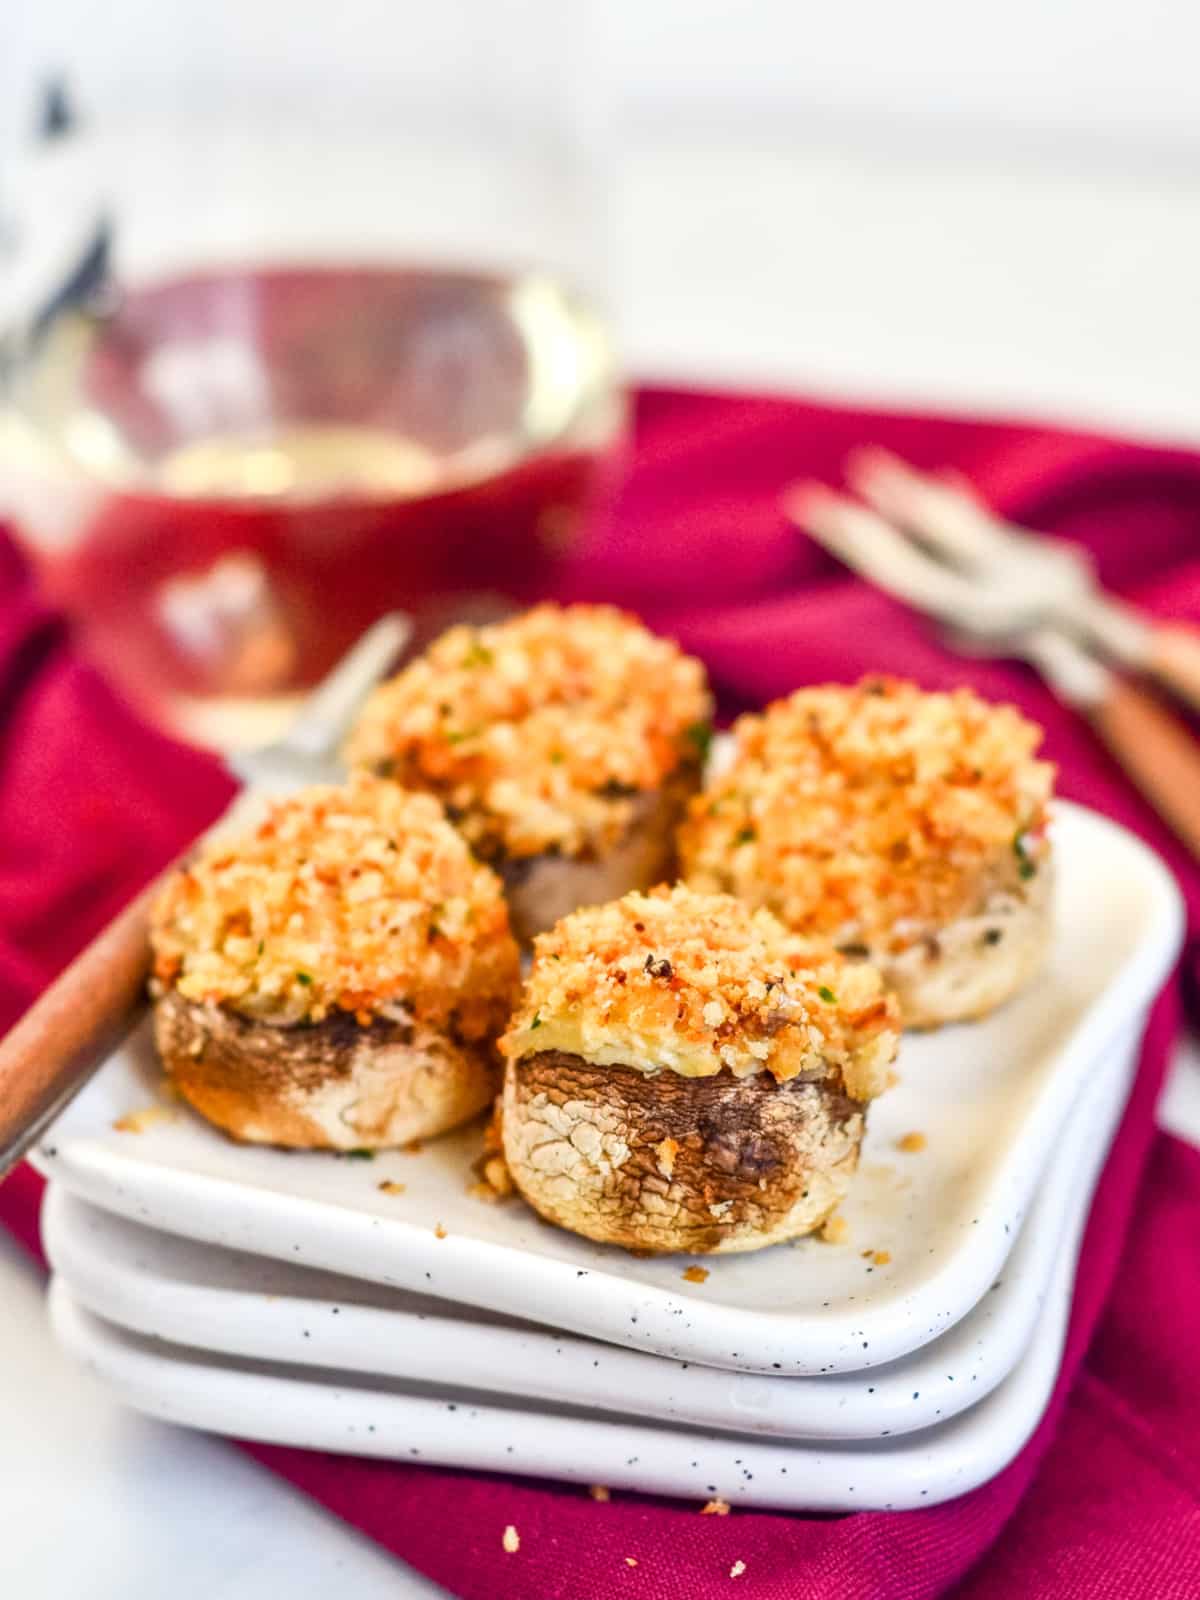 stuffed mushrooms on appetizer plate with white wine